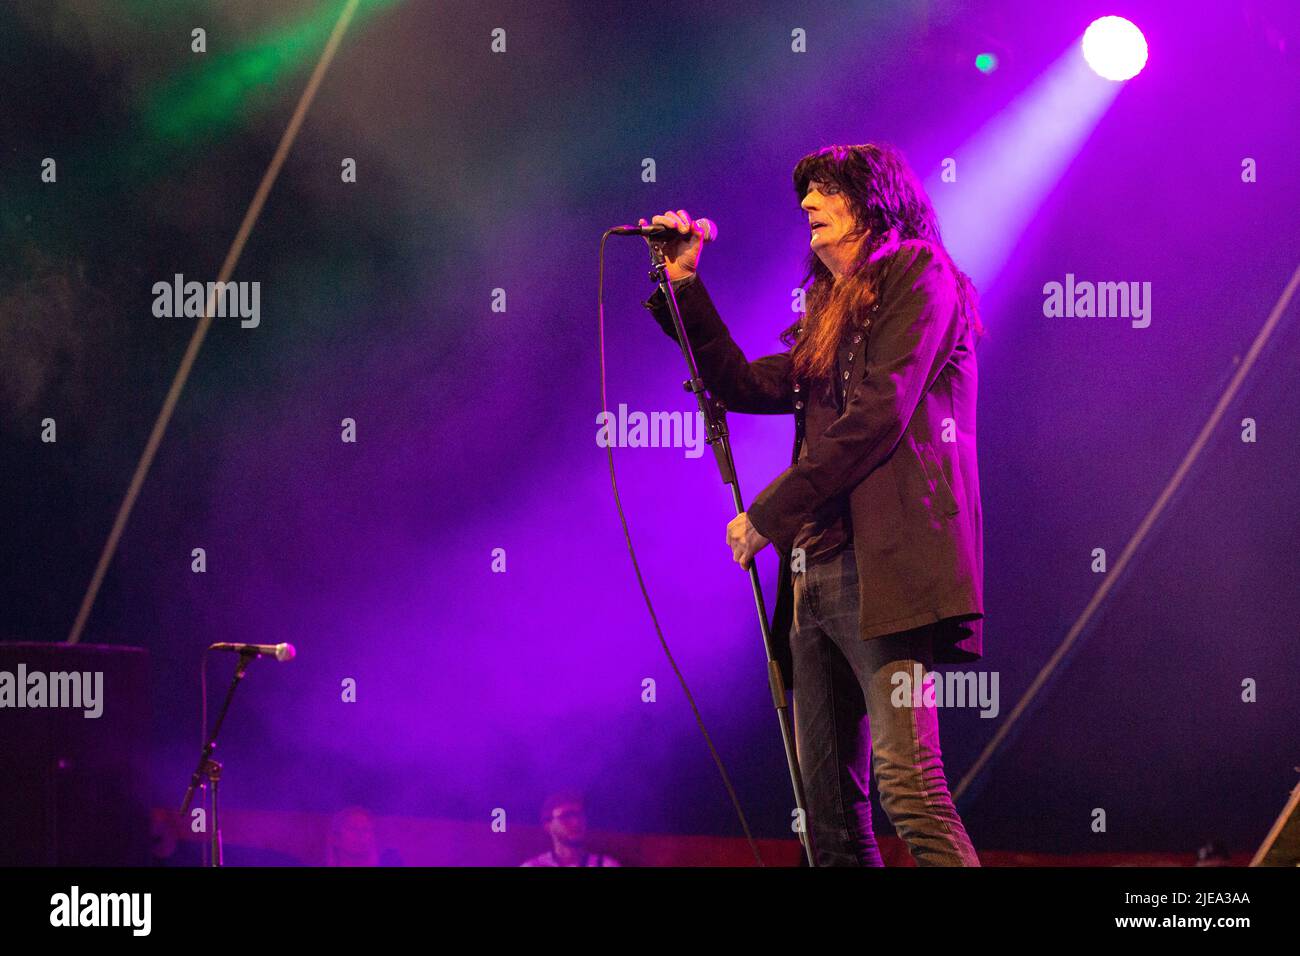 Oslo, Norway. 24th, June 2022. The Norwegian rock band Backstreet Girls performs a live concert during the Norwegian music festival Tons of Rock 2022 in Oslo. Here vocalist Bjorn Muller is seen live on stage. (Photo credit: Gonzales Photo - Per-Otto Oppi). Stock Photo